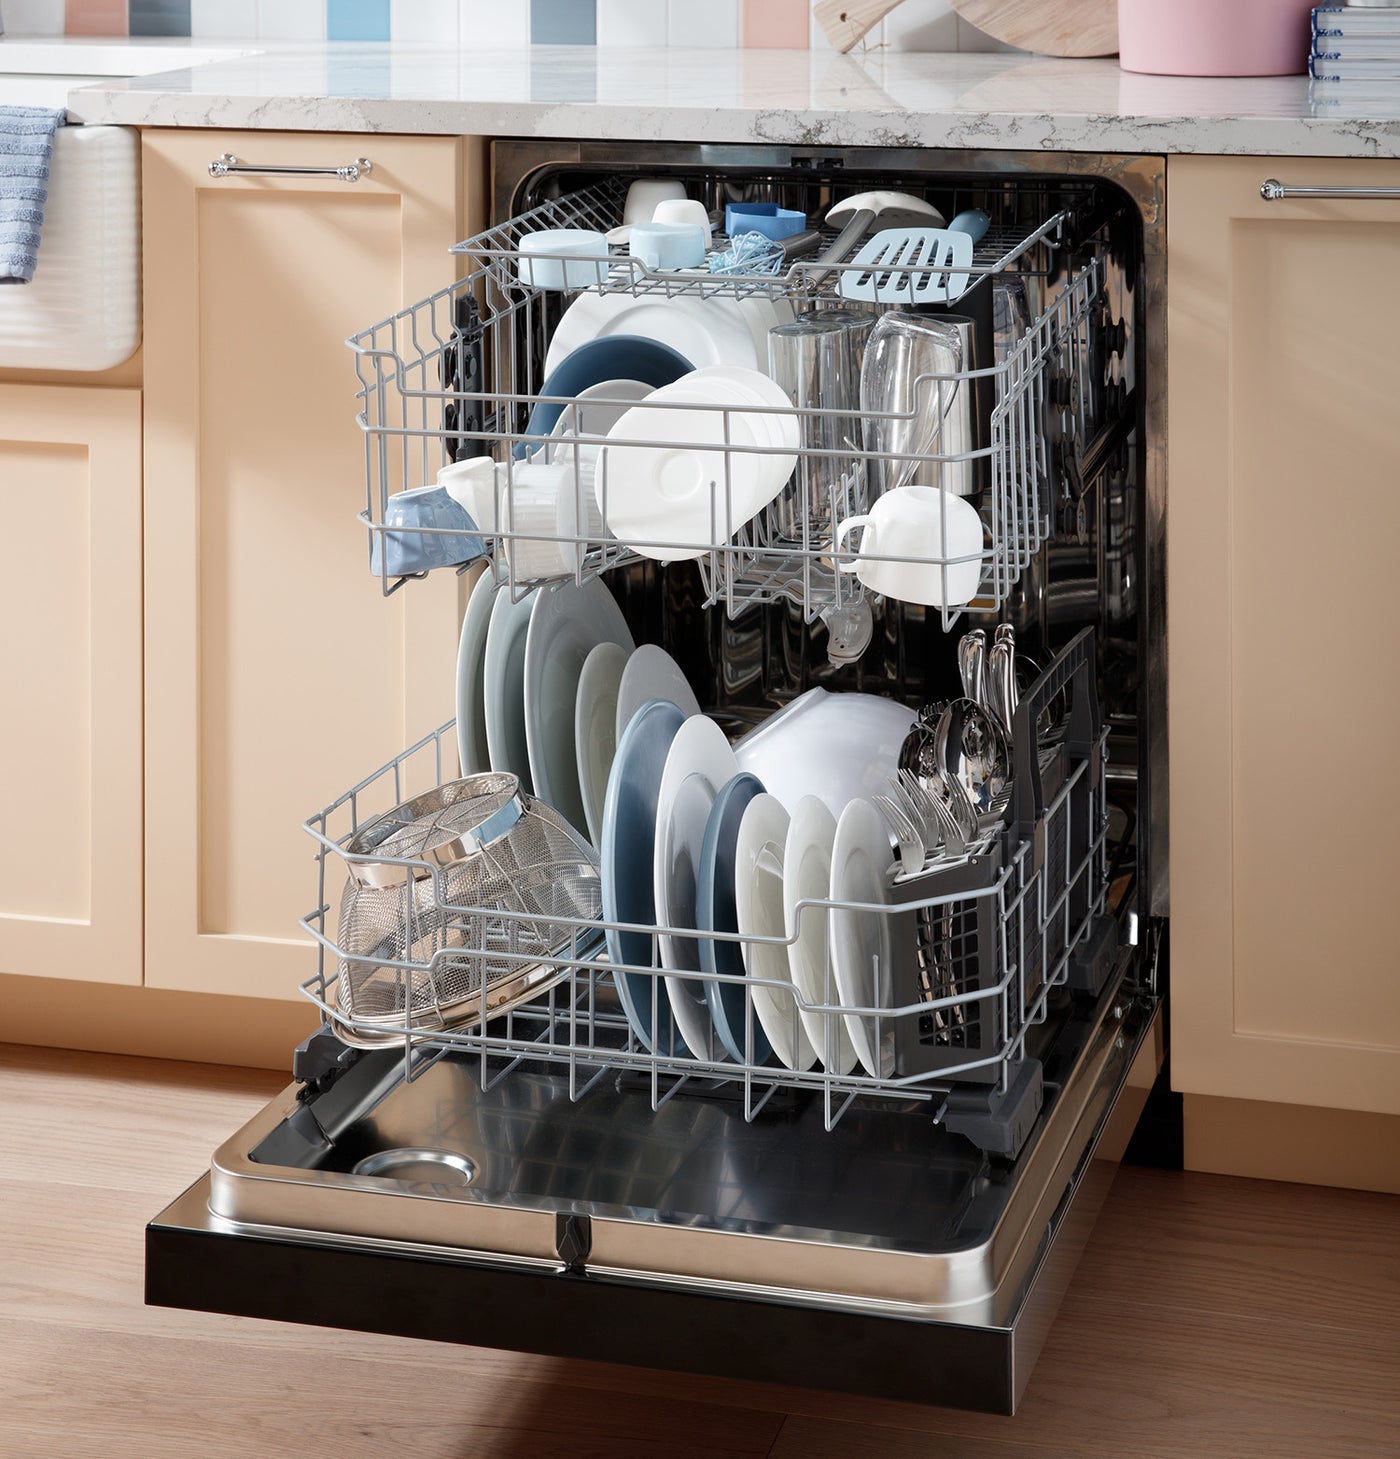 GE 24" Fingerprint Resistant Stainless Steel Dishwasher with Stainless Steel Interior and Third Rack- GDF650SYVFS